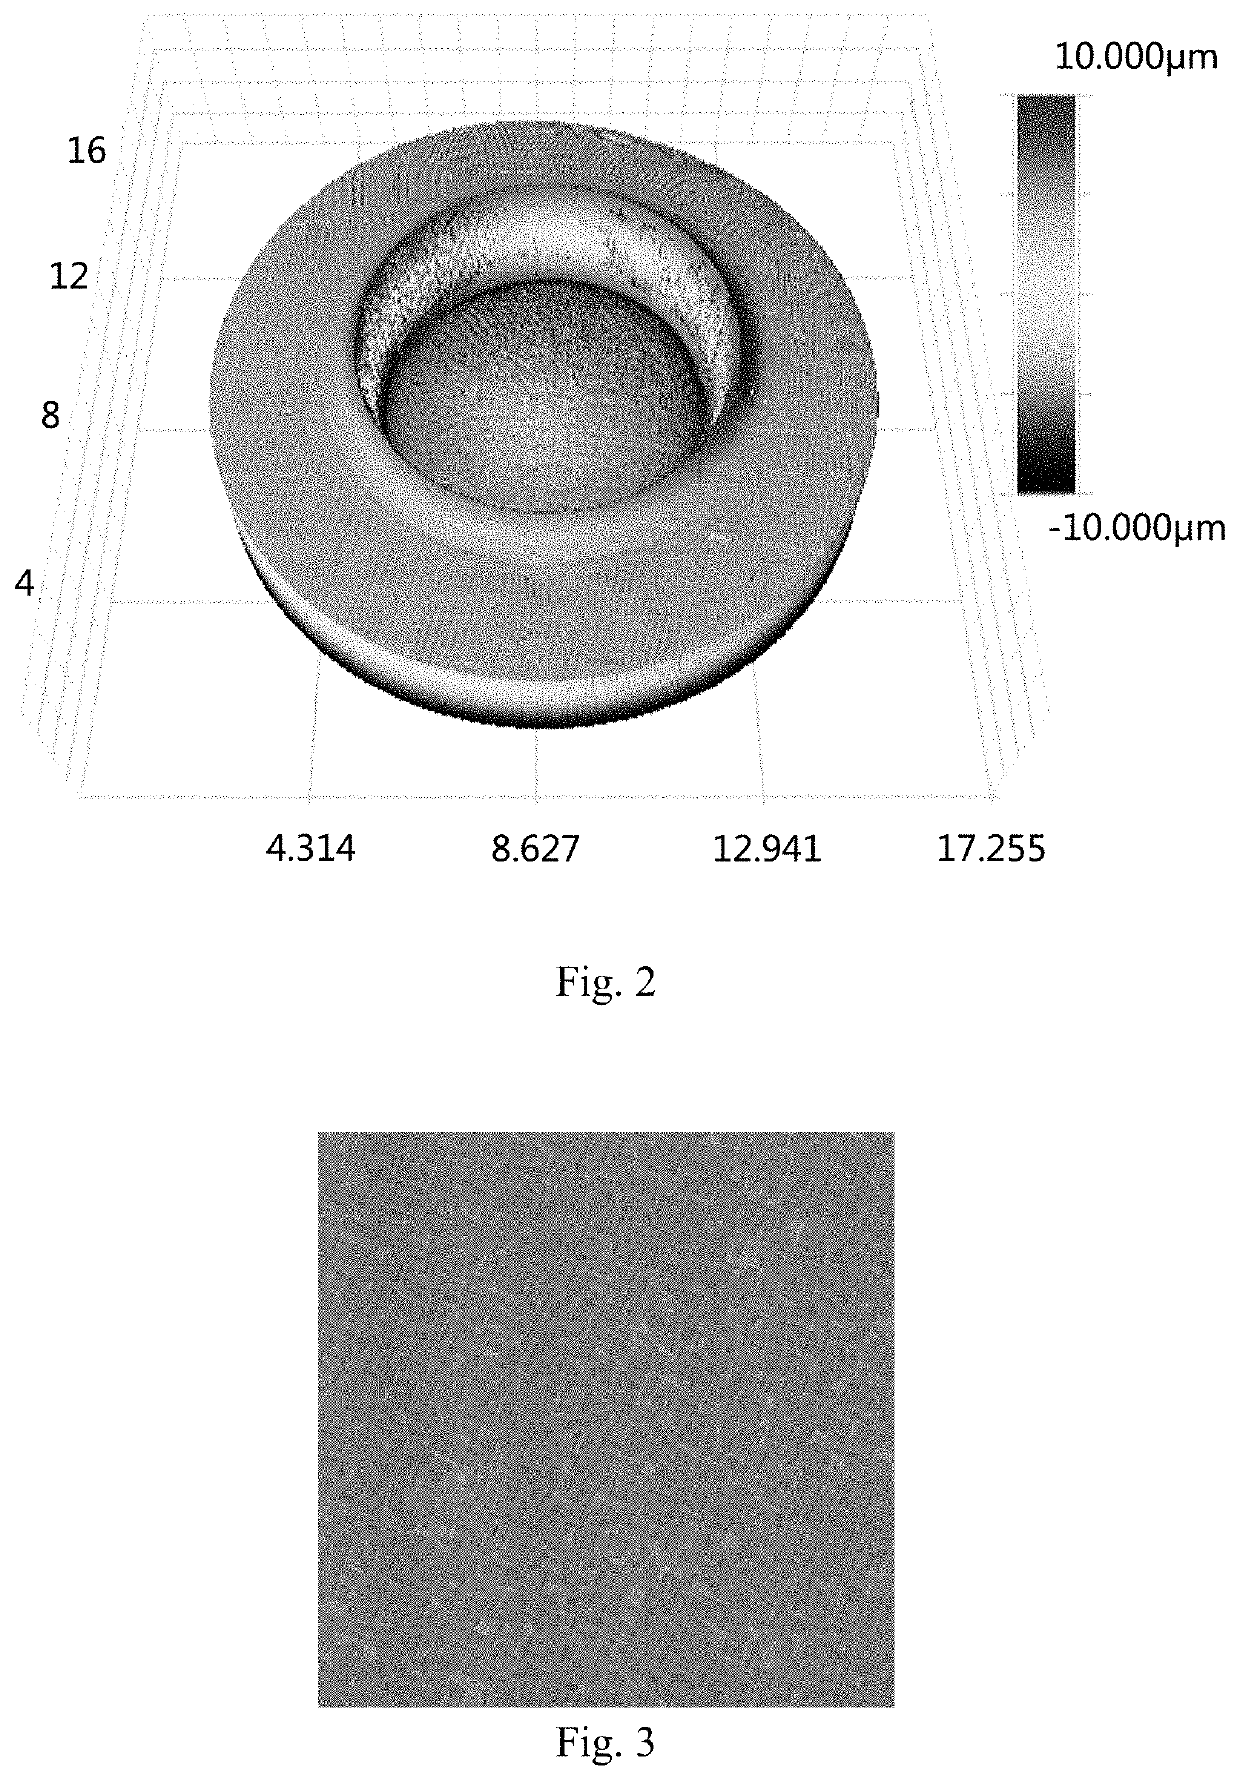 Apparatus and method for large-scale high throughput quantitative characterization and three-dimensional reconstruction of material structure